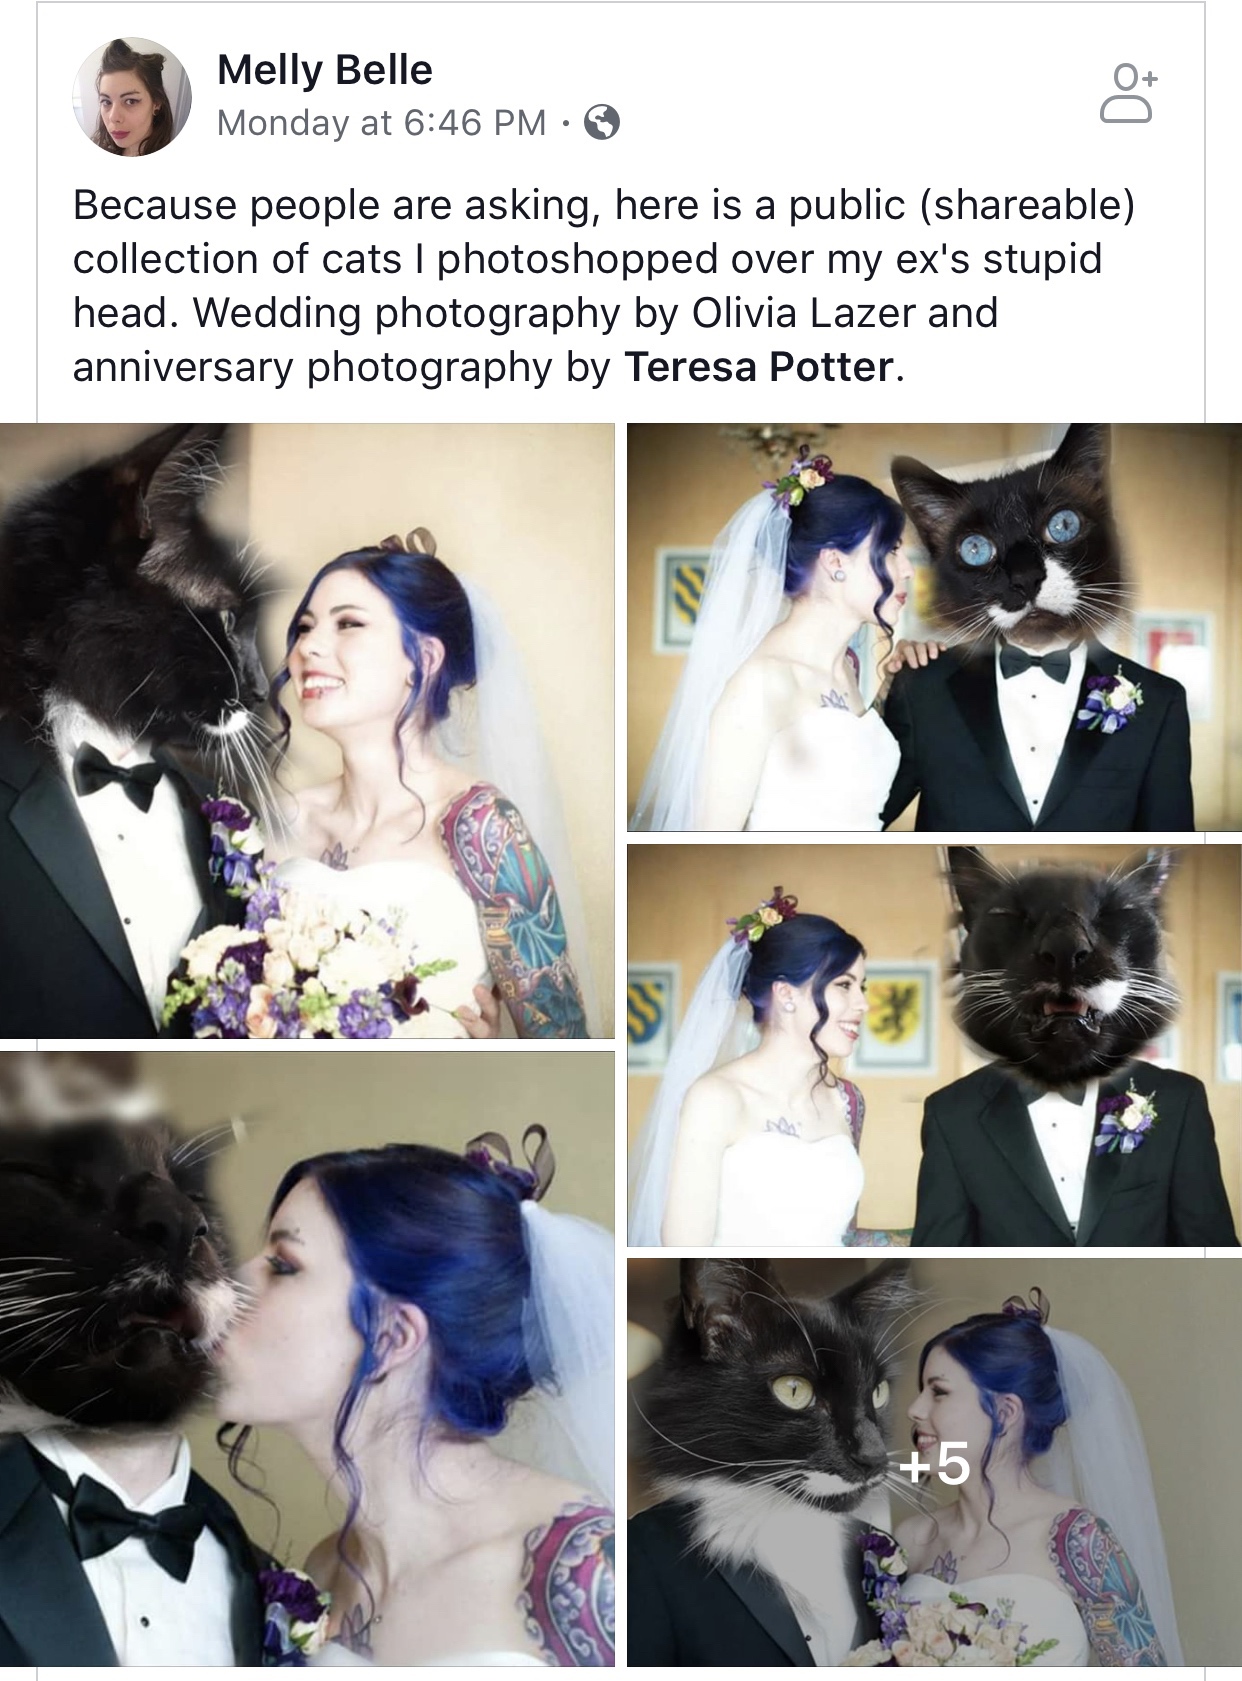 black hair - Melly Belle Monday at Because people are asking, here is a public able collection of cats i photoshopped over my ex's stupid head. Wedding photography by Olivia Lazer and anniversary photography by Teresa Potter.